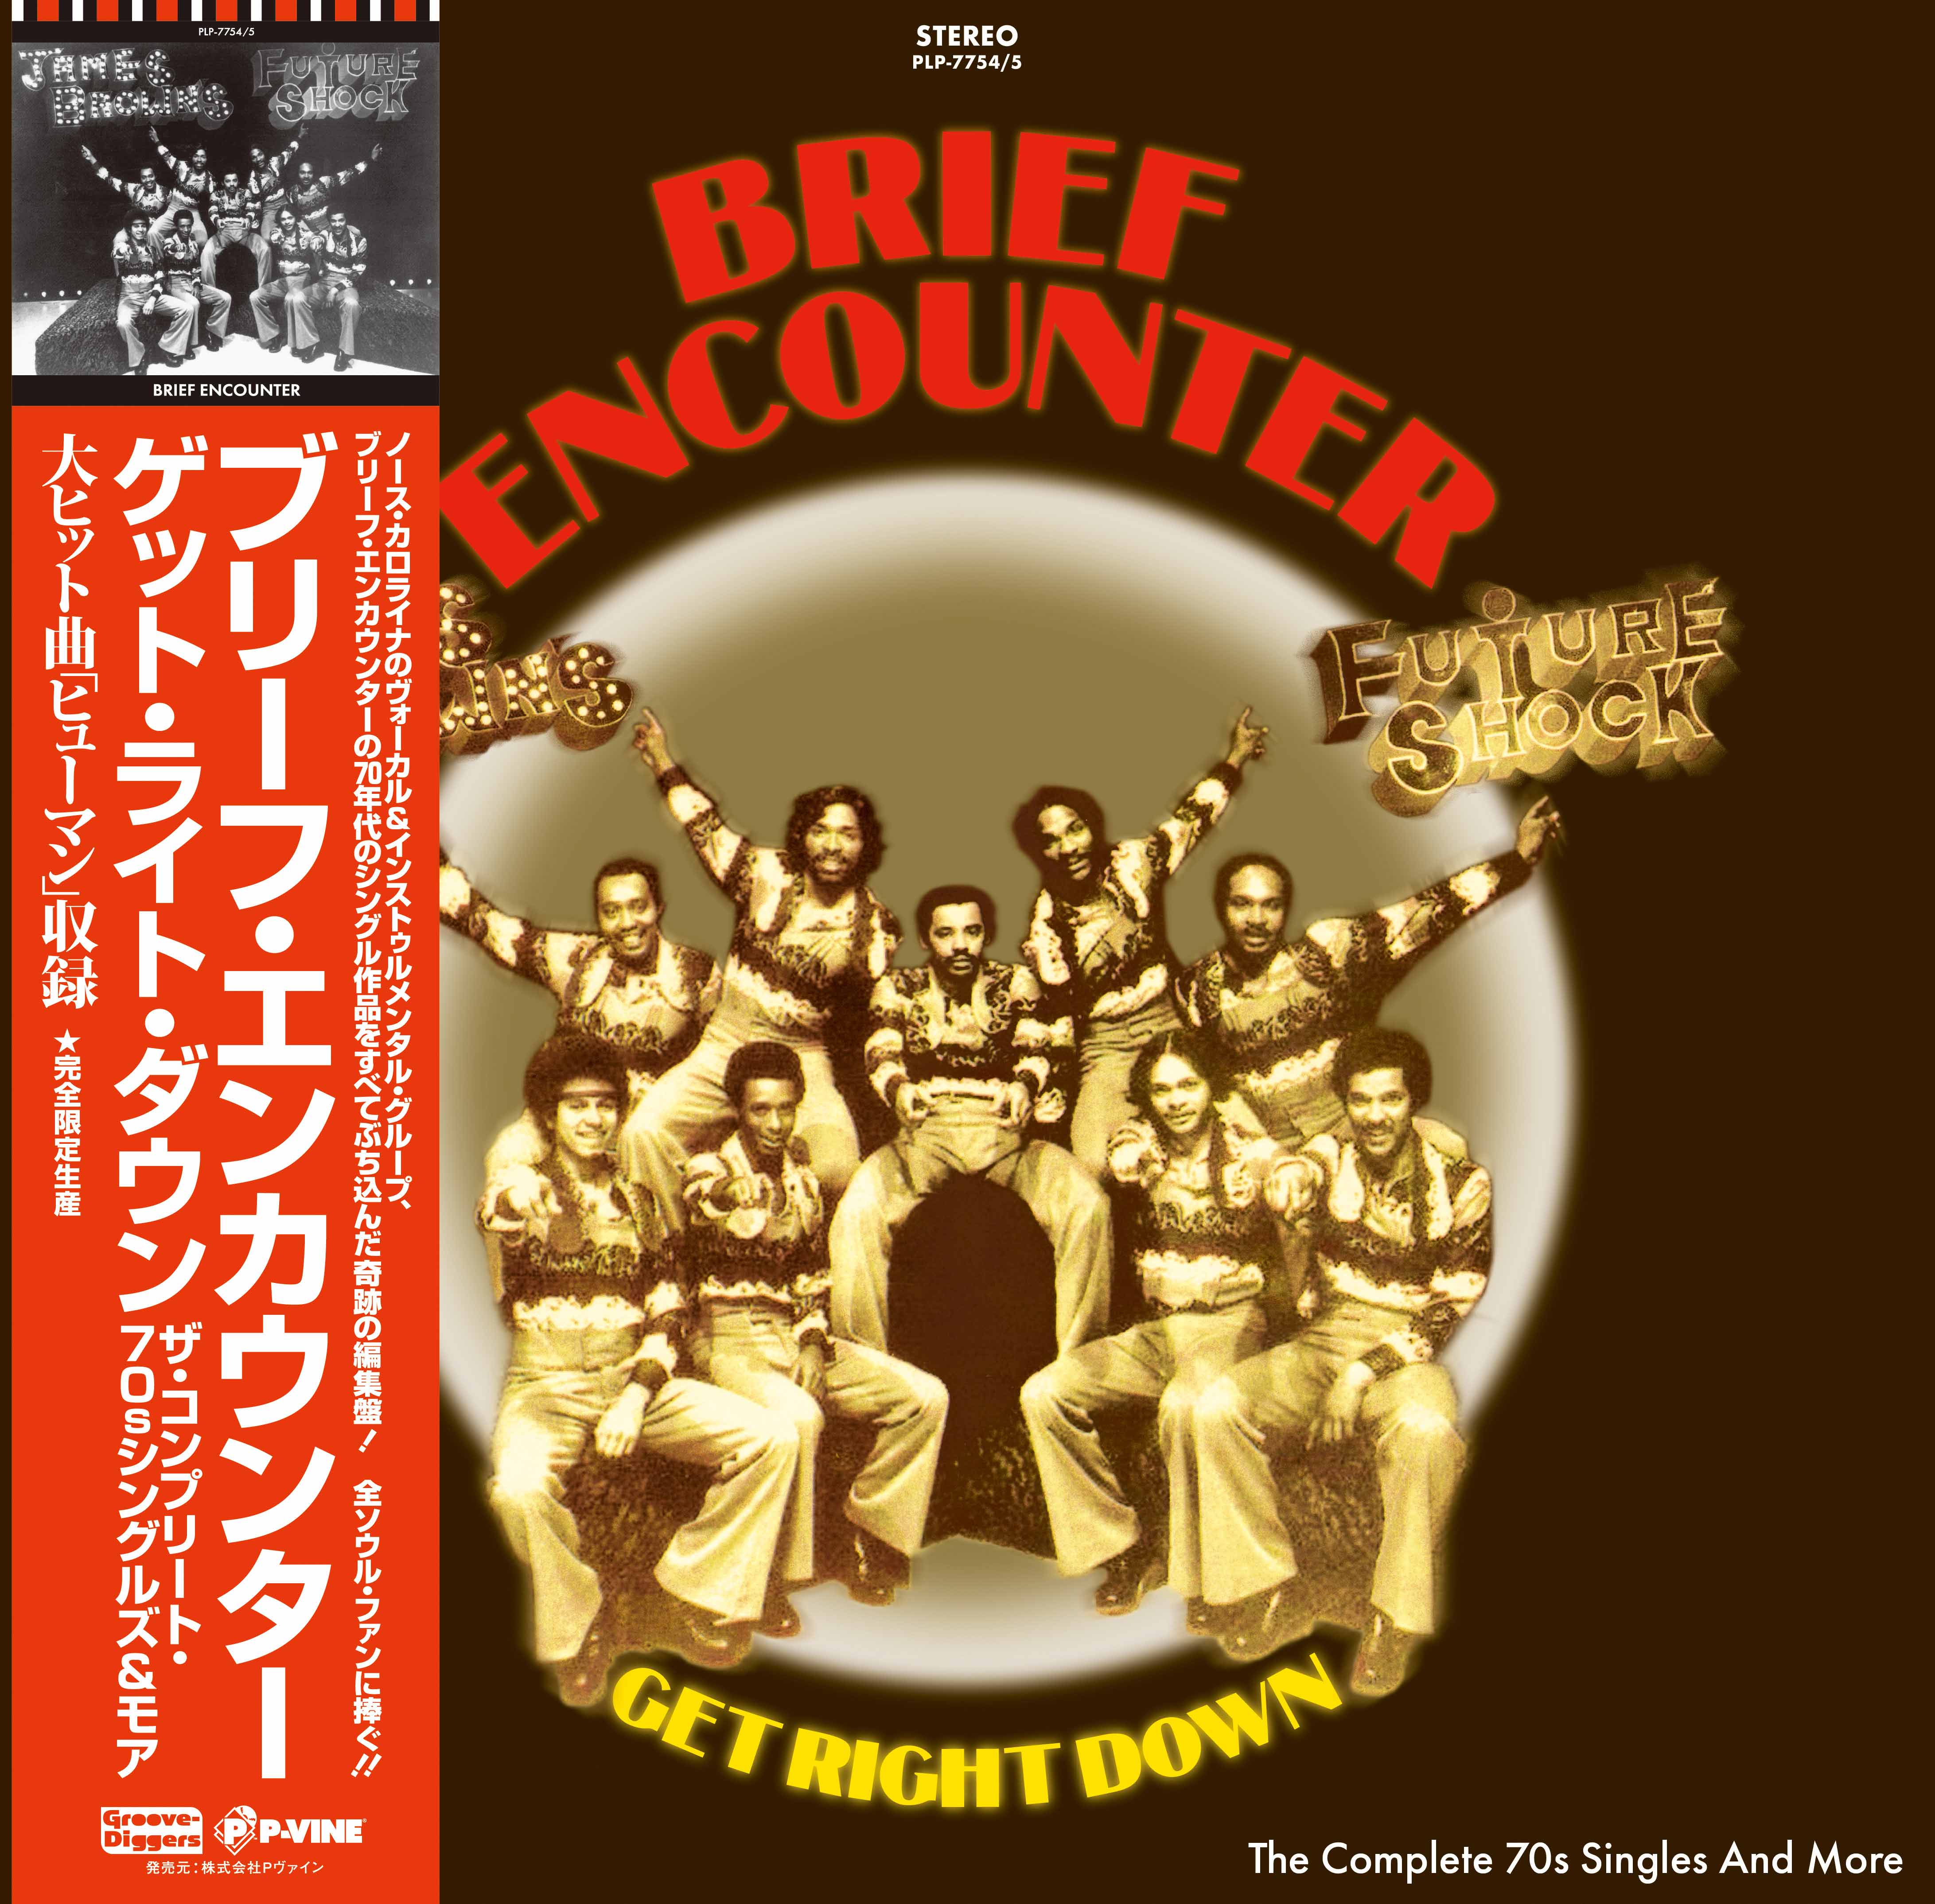 THE BRIEF ENCOUNTER『Get Right Down - The Complete 70s Singles And More